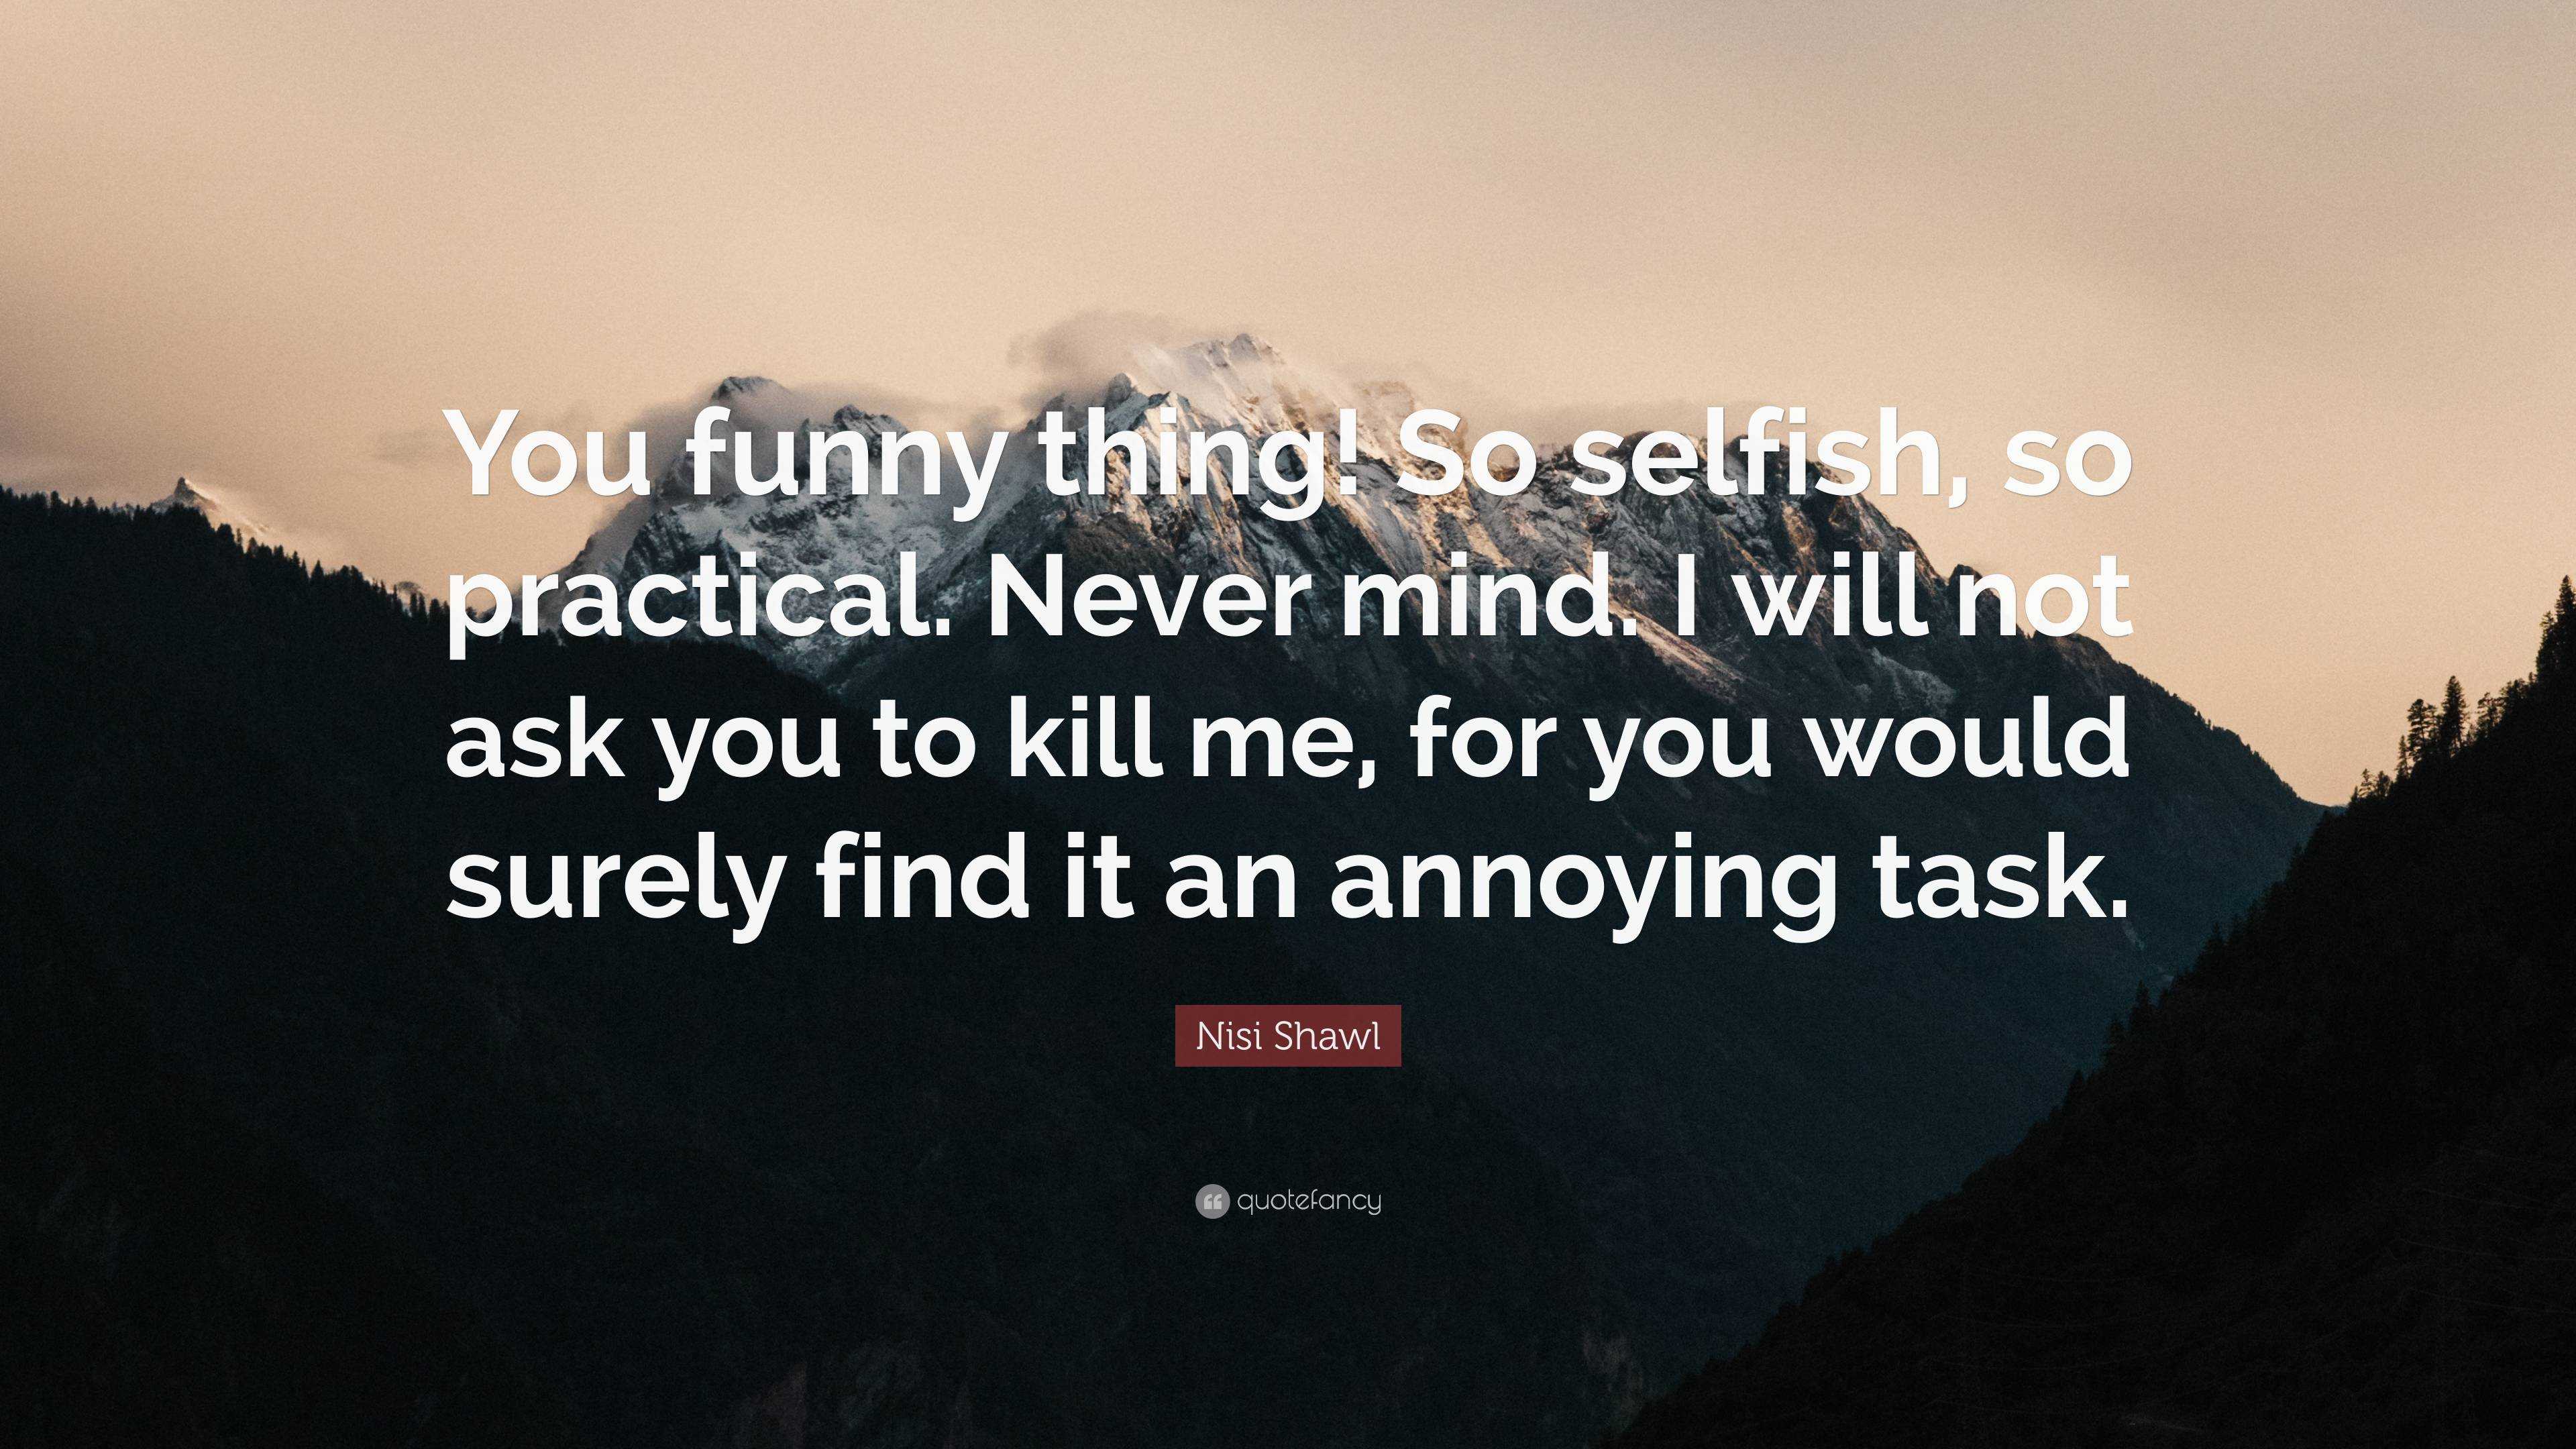 Nisi Shawl Quote: “You funny thing! So selfish, so practical. Never mind. I  will not ask you to kill me, for you would surely find it an an...”